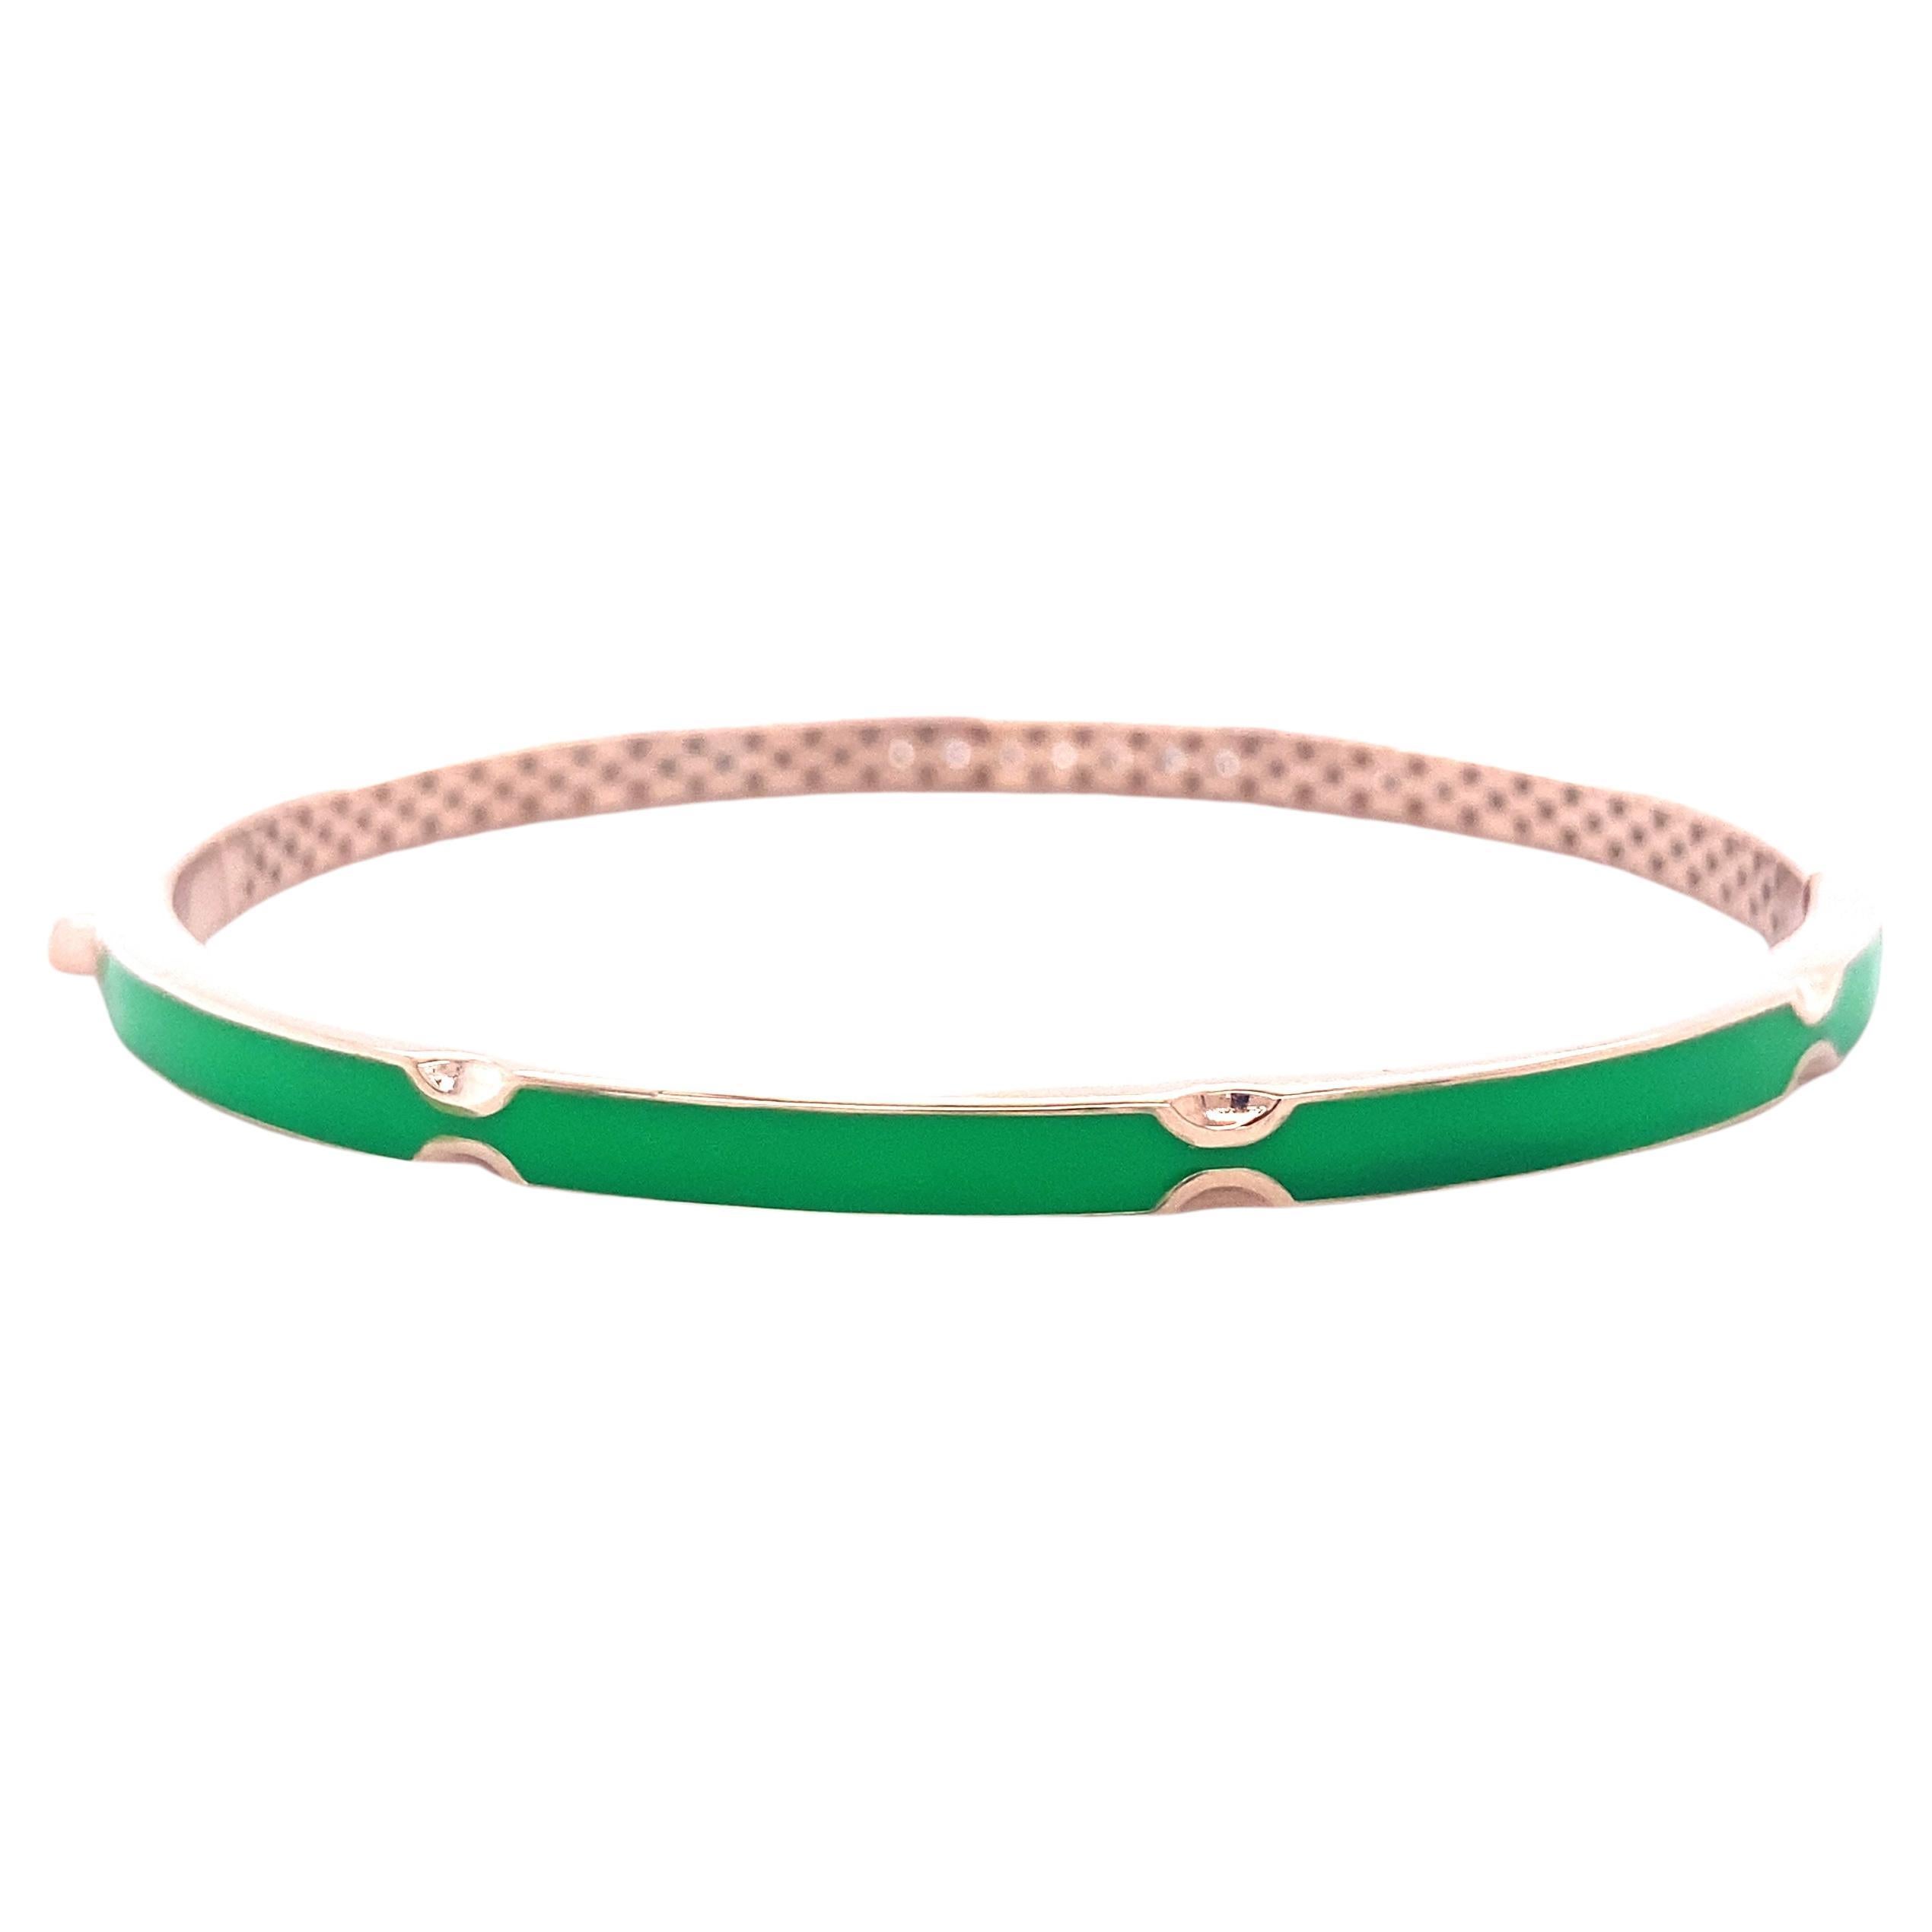 The Diamond Bracelet with Green Enamelling set in 18k Solid Gold is a stunning piece of jewelry that combines the elegance of diamonds with the vibrant beauty of green enameling. This unique bracelet features a cuff design, with one side adorned